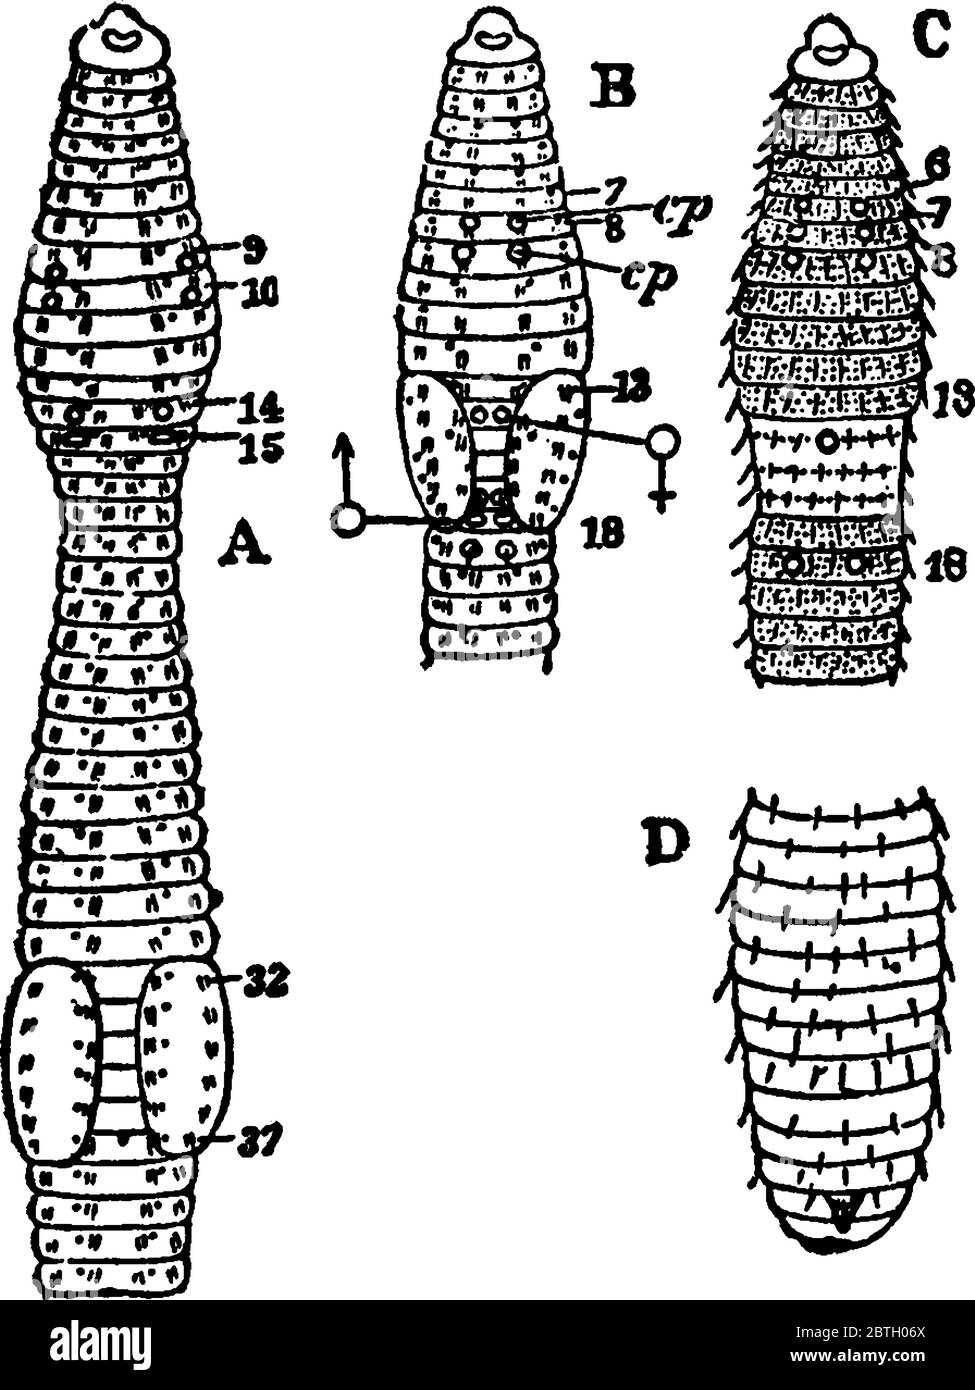 Diagrams of various earthworms to illustrate external characters